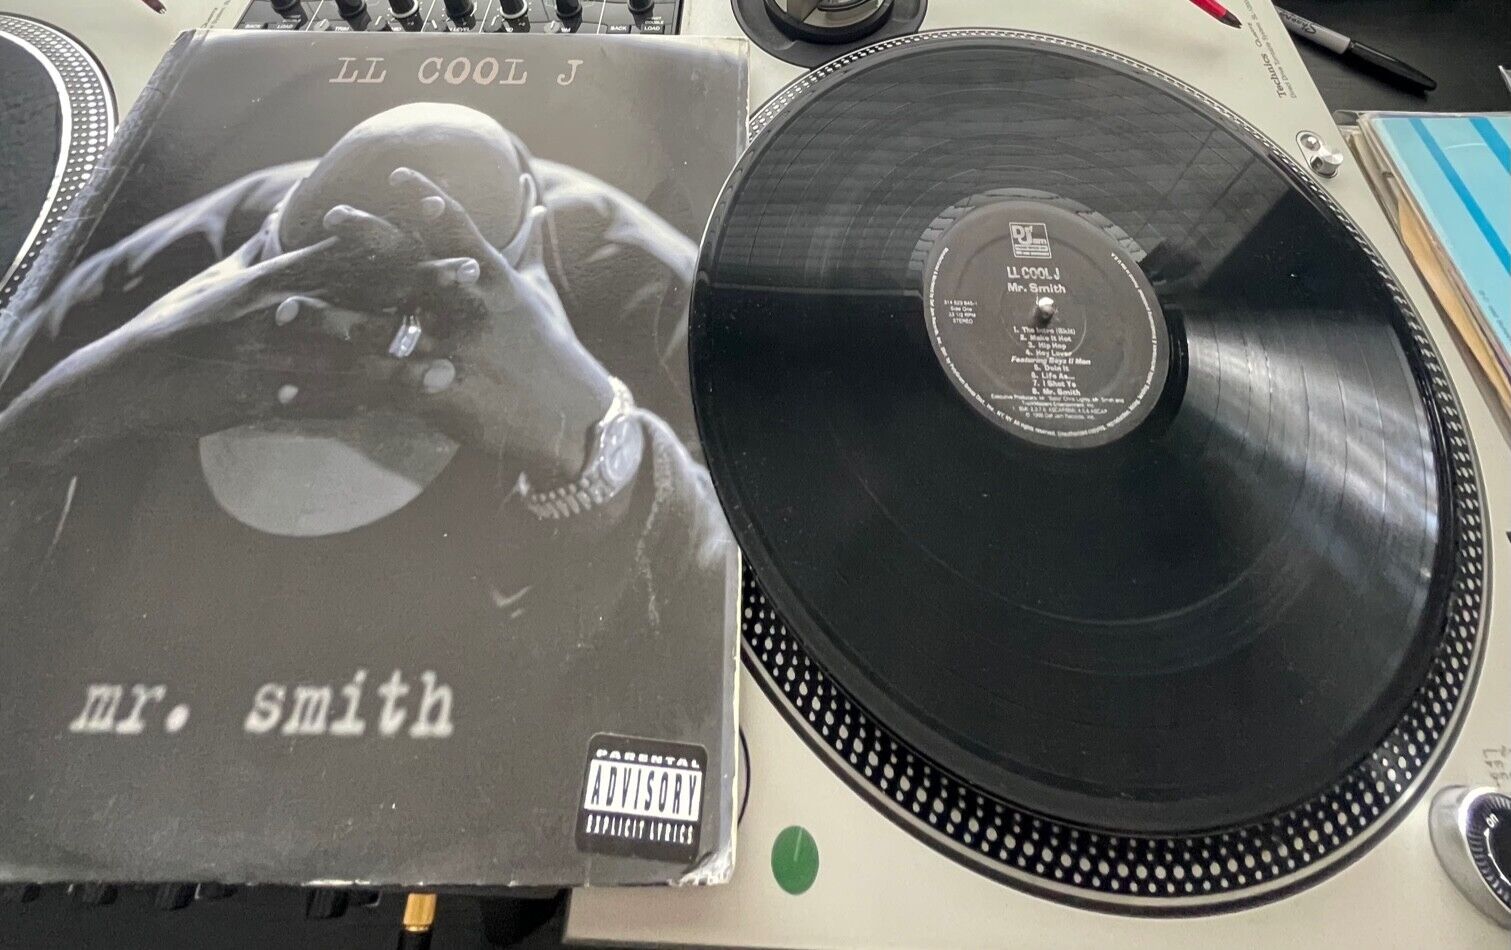 LL Cool J - Mr. Smith Original 1995 Pressing LP  in Picture Cover VG